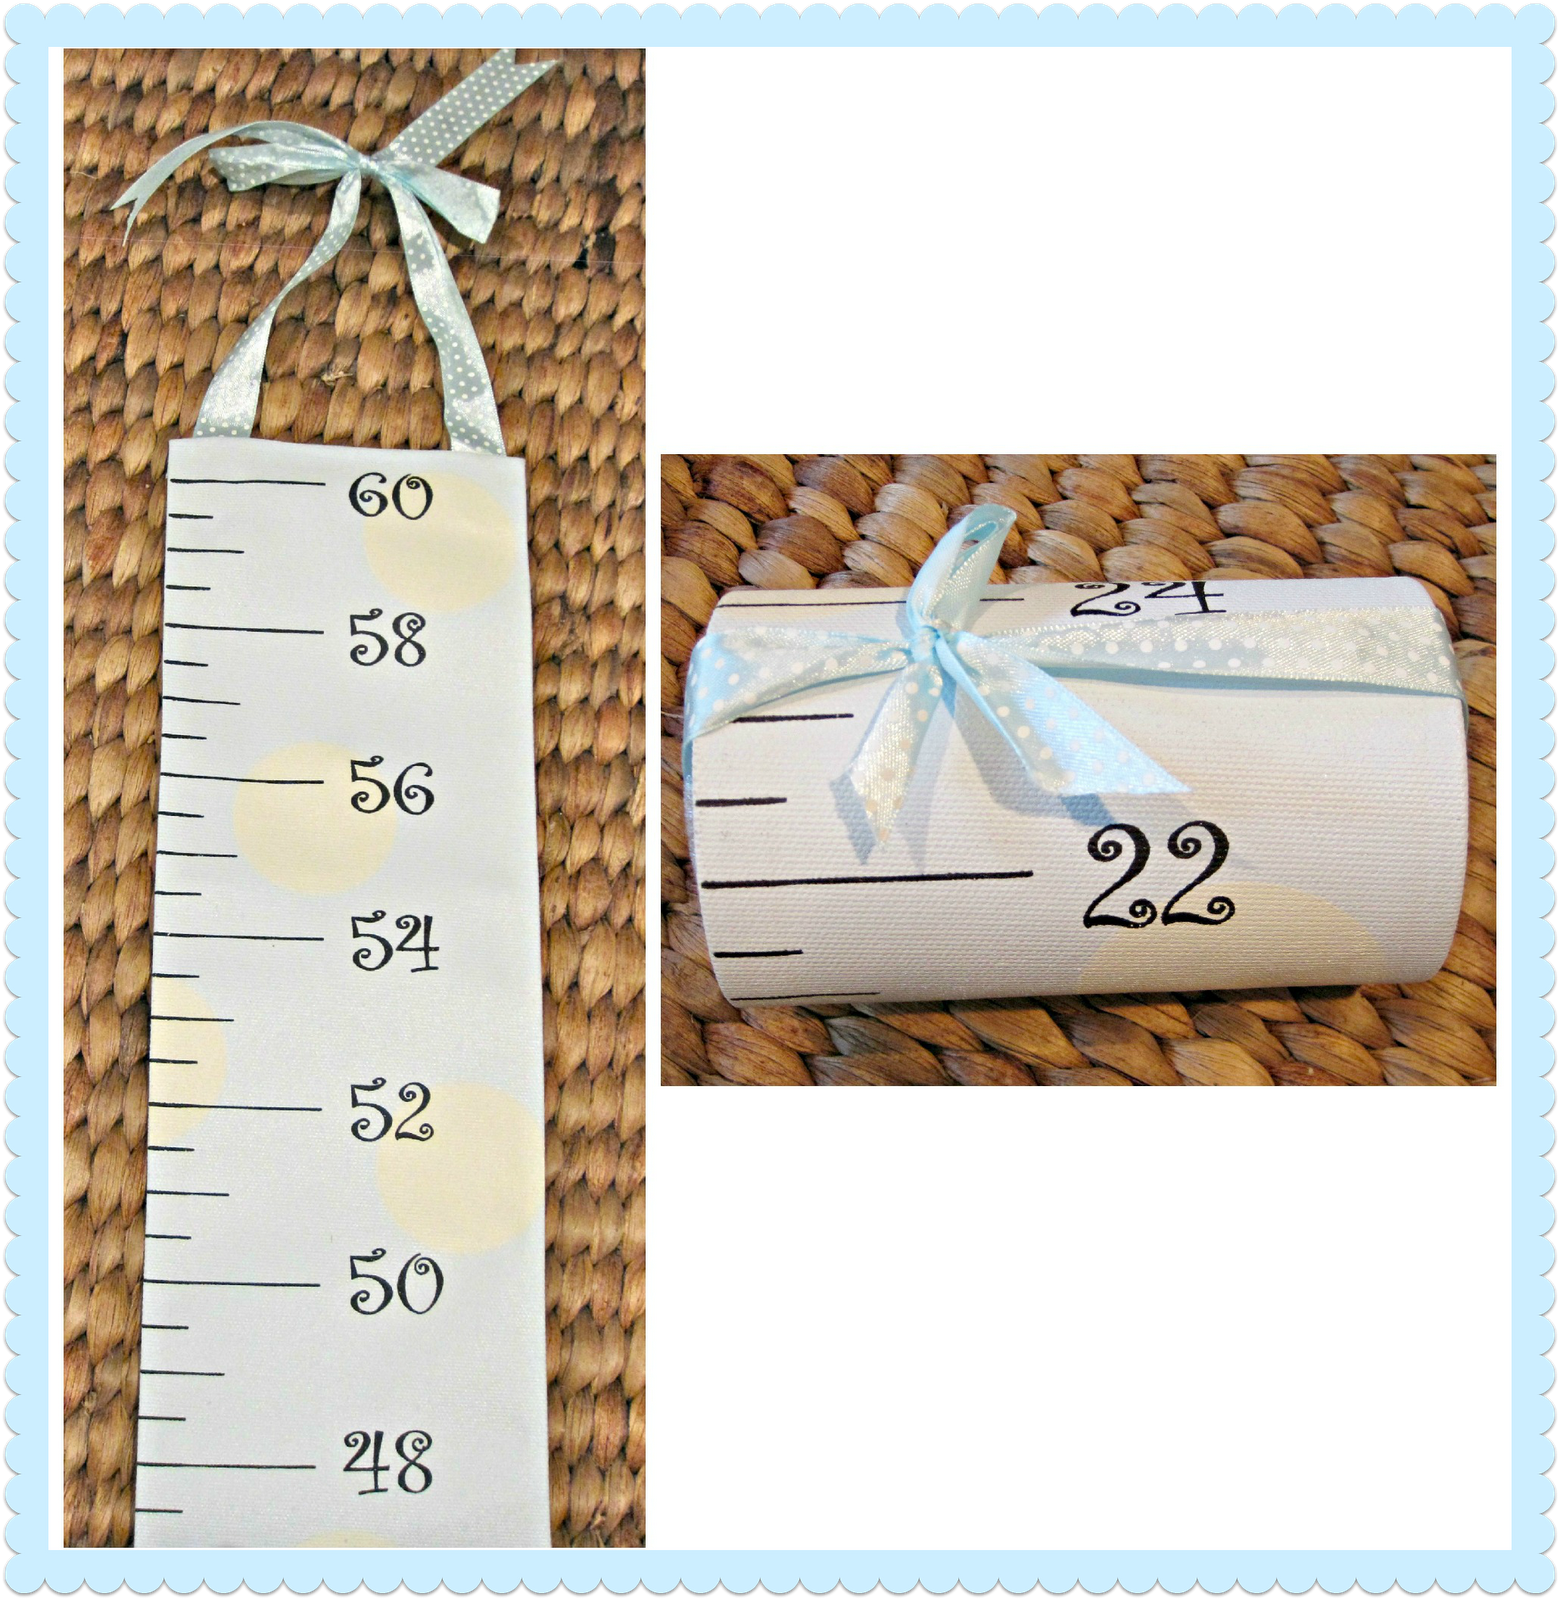 Decorative Growth Charts & Rulers | Driven by Decor